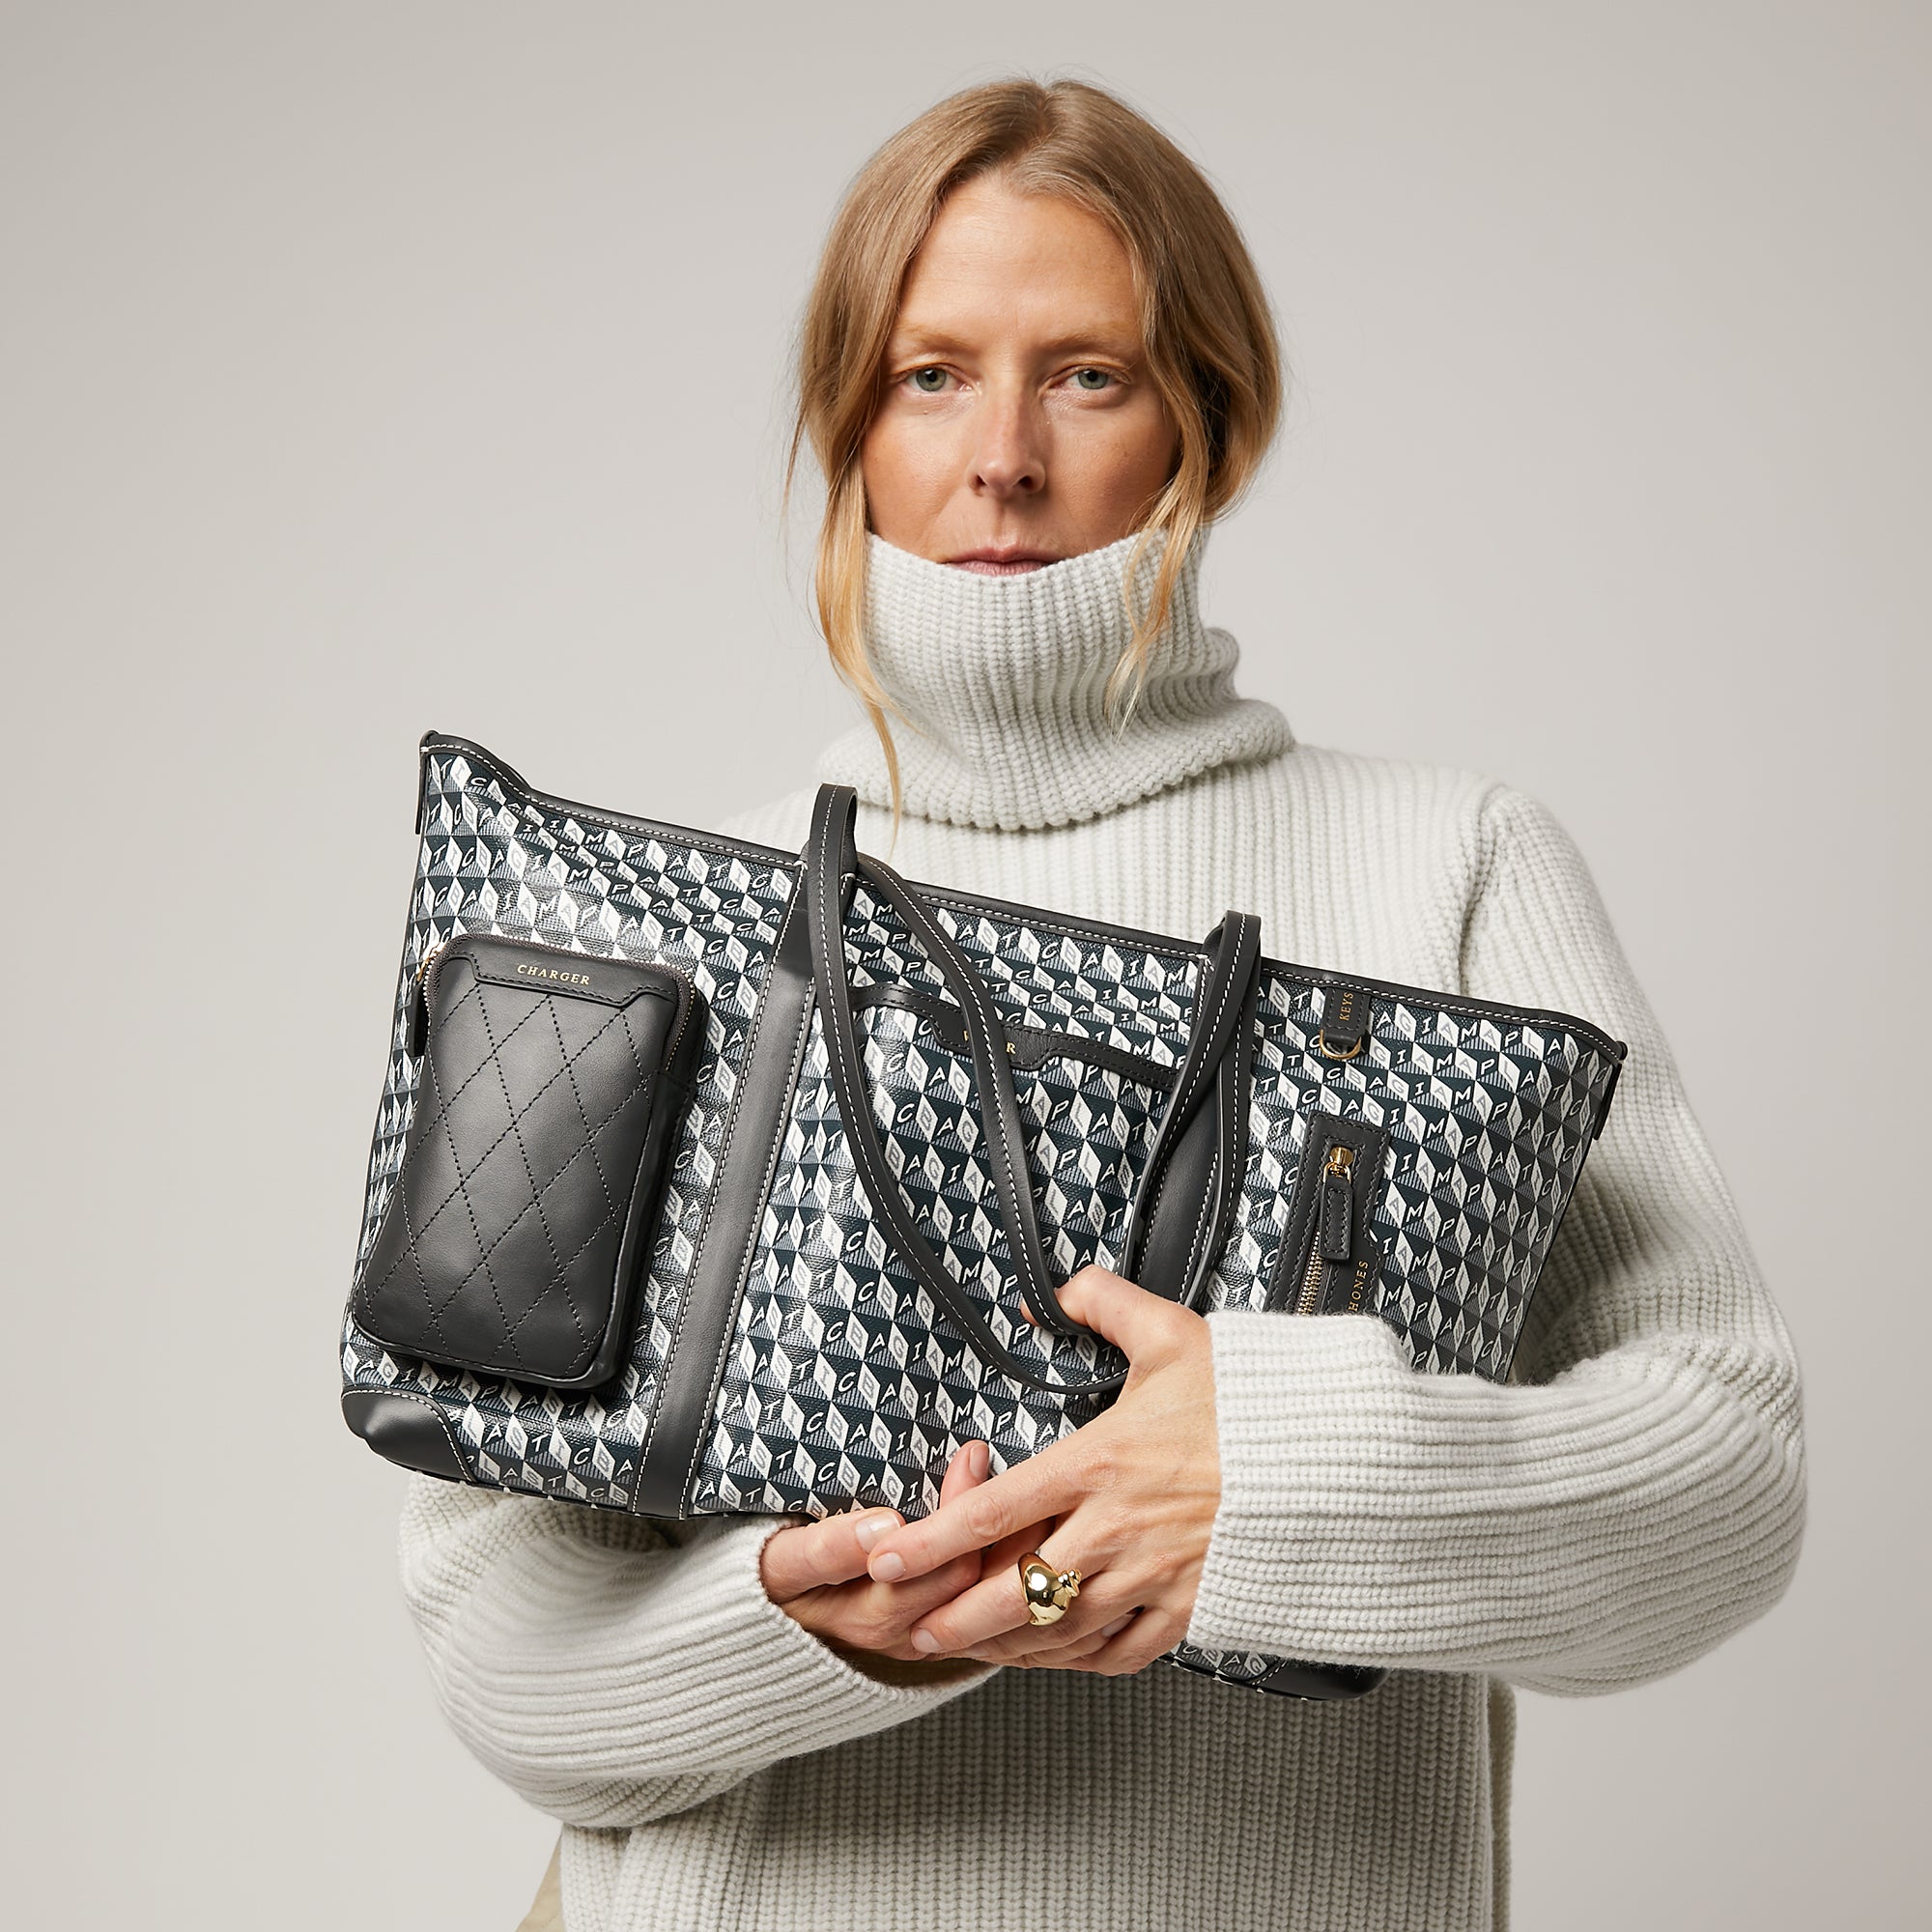 「I AM A Plastic Bag」 インフライト トート -

                  
                    Recycled Coated Canvas in Charcoal -
                  

                  Anya Hindmarch JP
